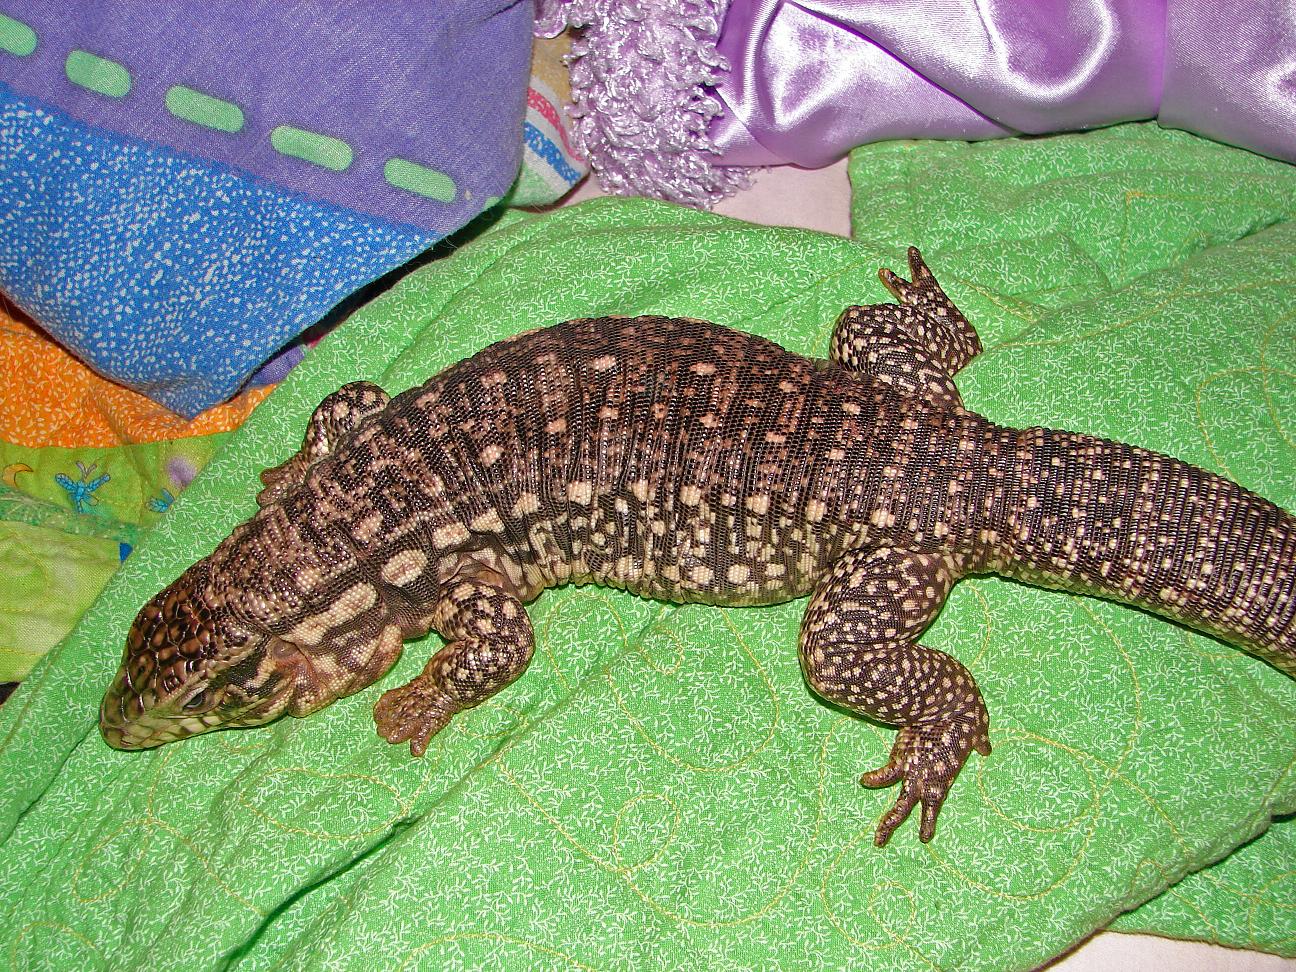 New Red Tegu